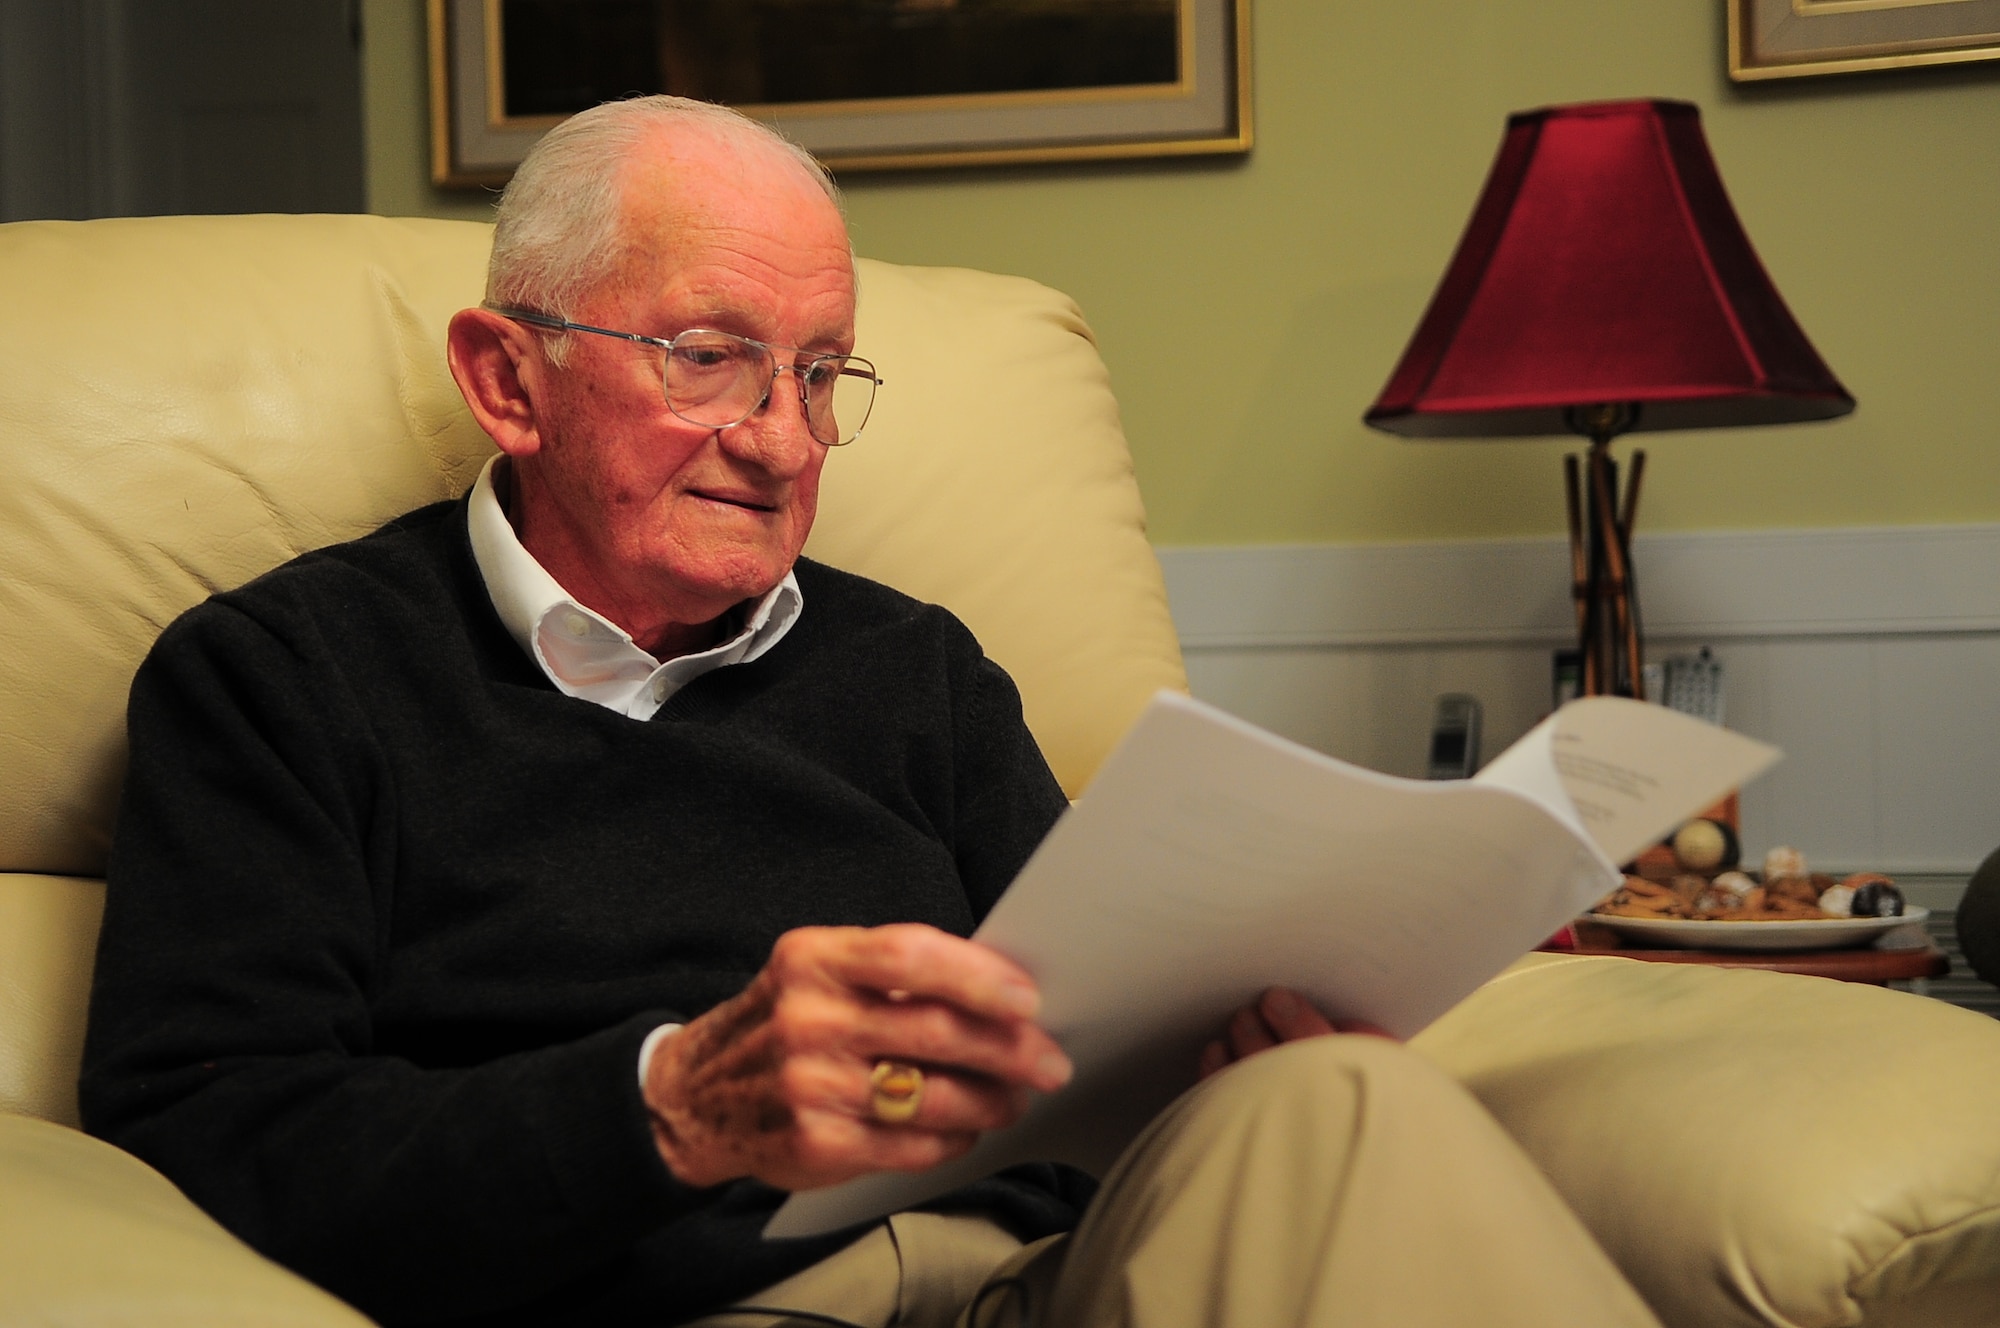 U.S. Air Force retired Lt. Col. Harry Pawlik reviews a speech written in his honor at his home in Greenville, N.C., Jan. 3, 2013. Pawlik, a World War II concentration camp survivor, recalled several obstacles from the time he was captured by Nazi forces at the age of 10, to the day he graduated from the Naval War College during a recent interview. (U.S. Air Force photo/Airman 1st Class Aubrey White/Released)